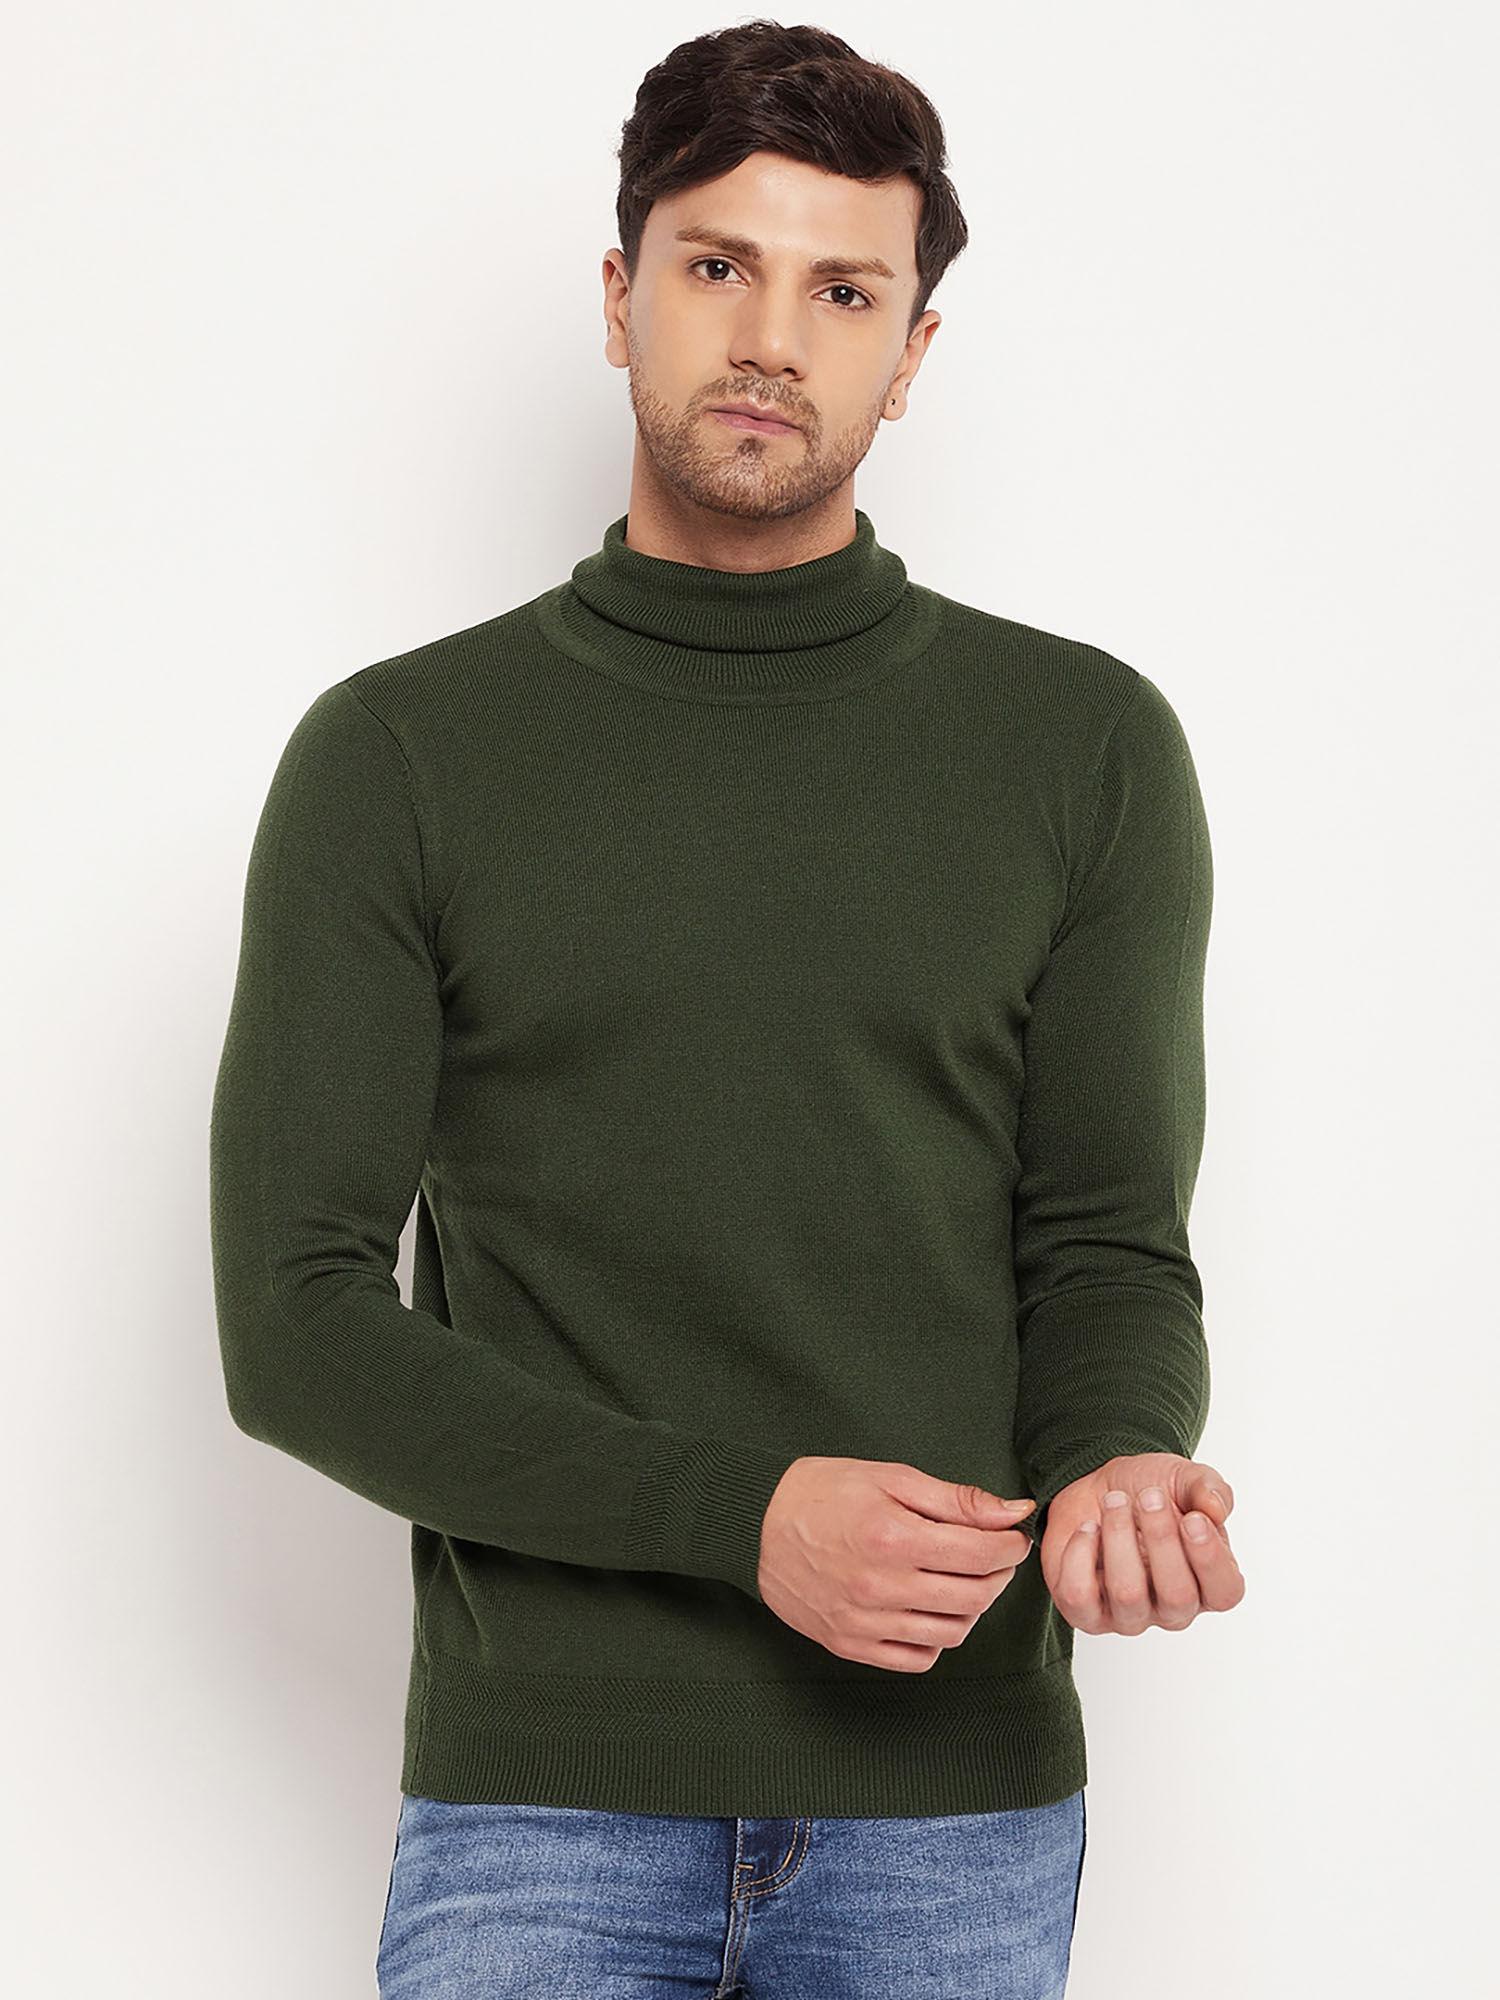 olive sweater for men